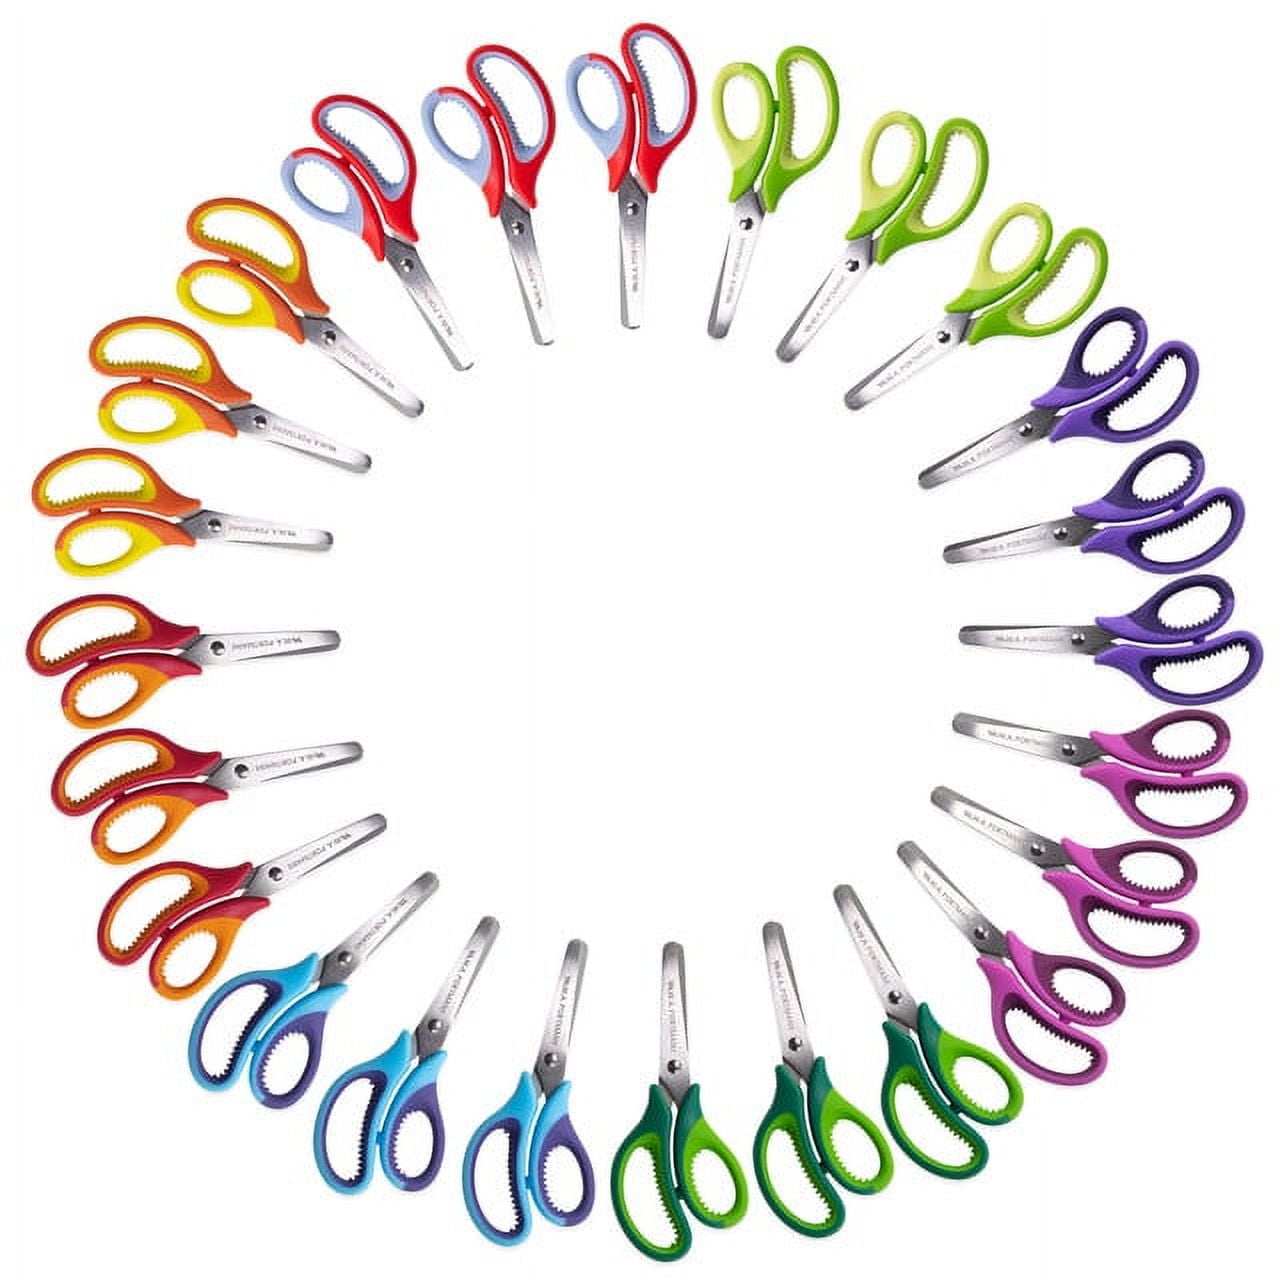 Stanley Guppy™ 5 Kids Scissors, Assorted Colors, 2-Pack